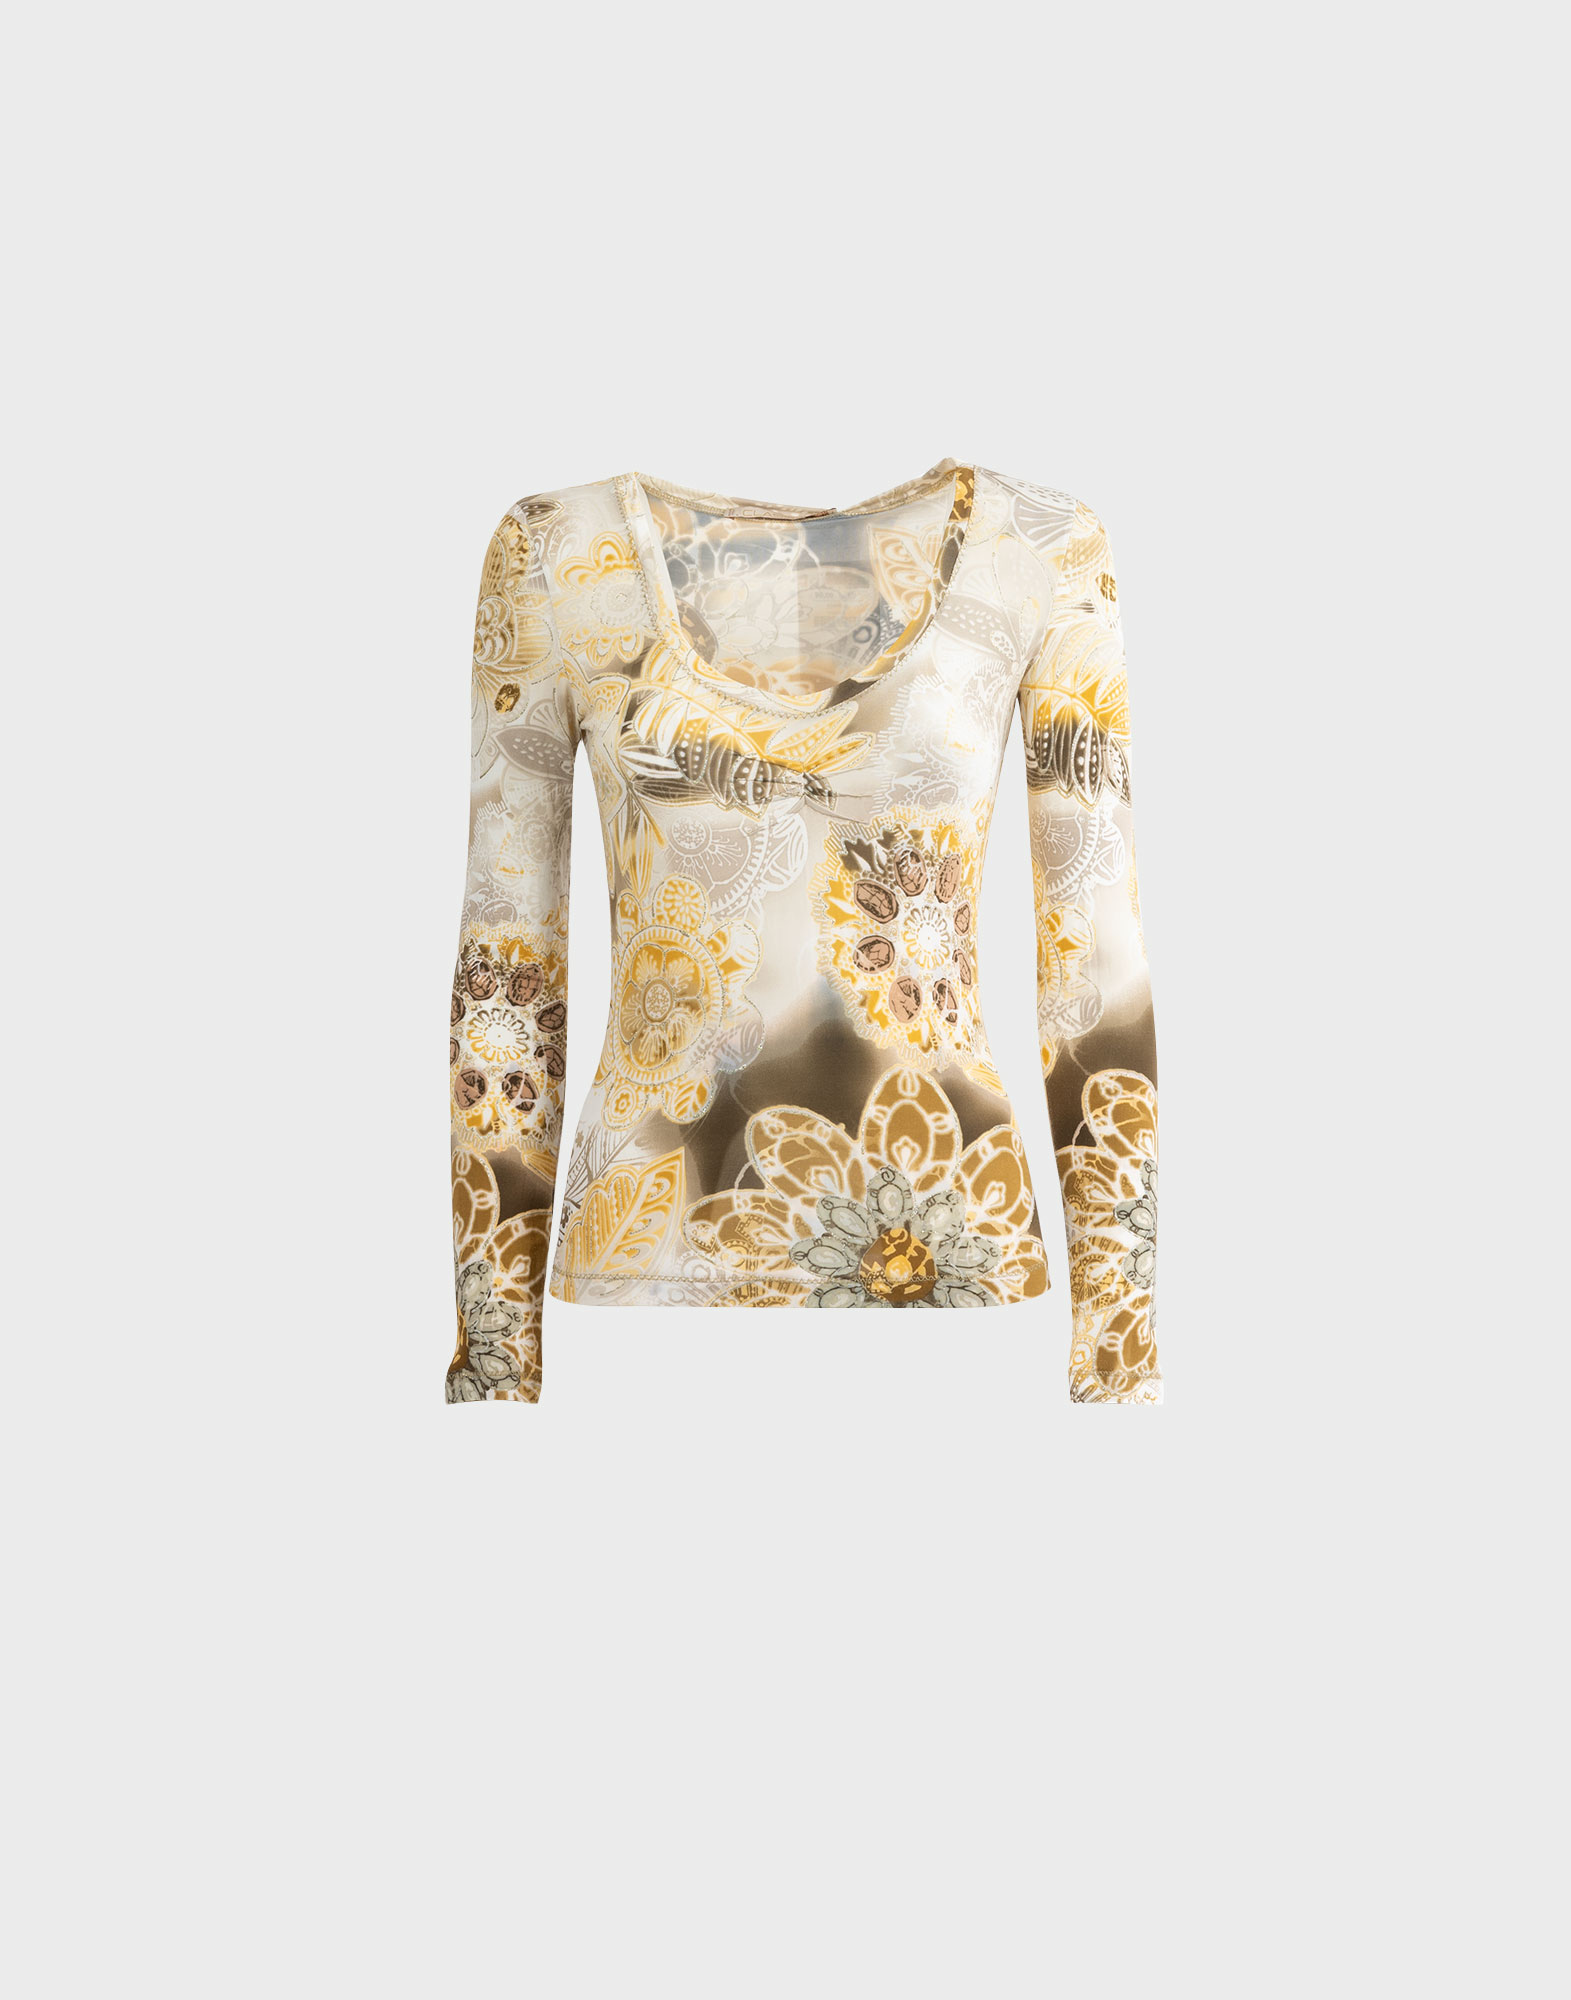 2000s long-sleeved women's t-shirt with beige pattern